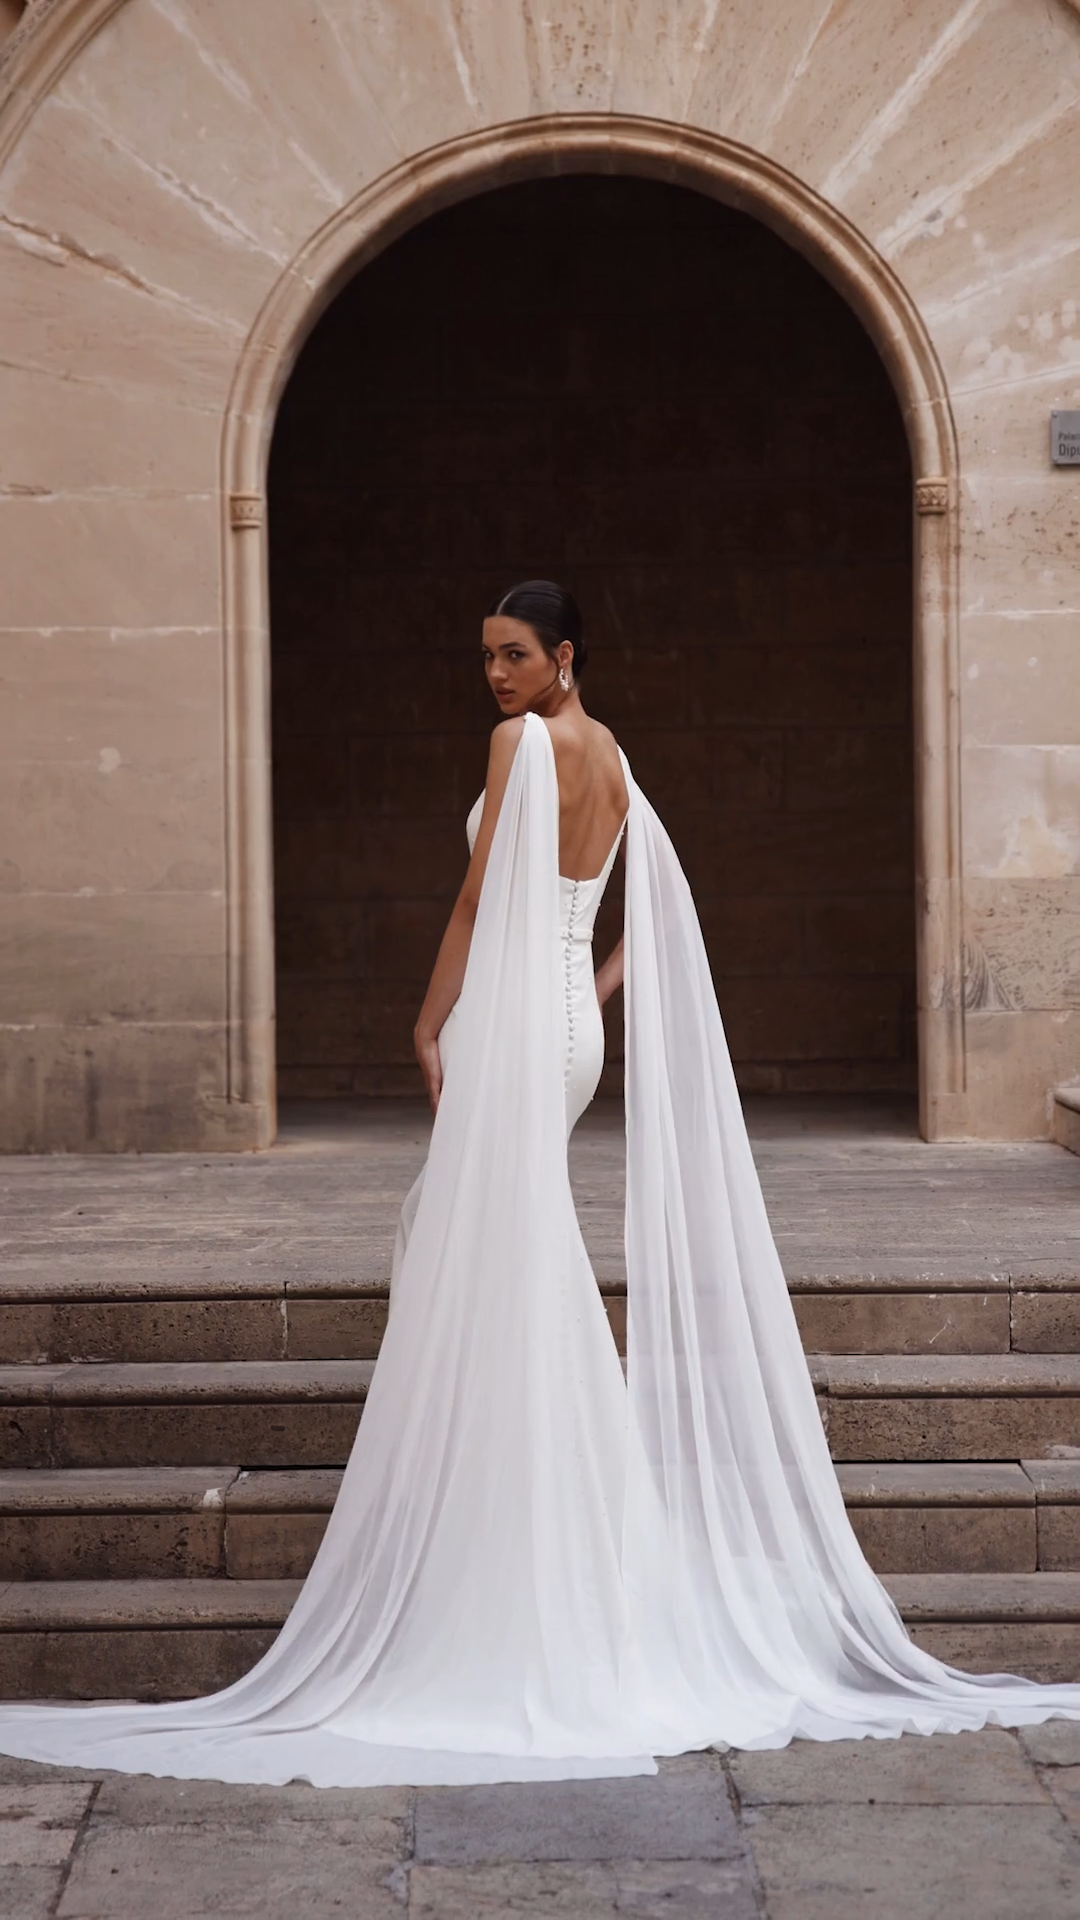 Bride wearing a deep v-neckline pearl and crepe wedding dress with detachable chiffon wings